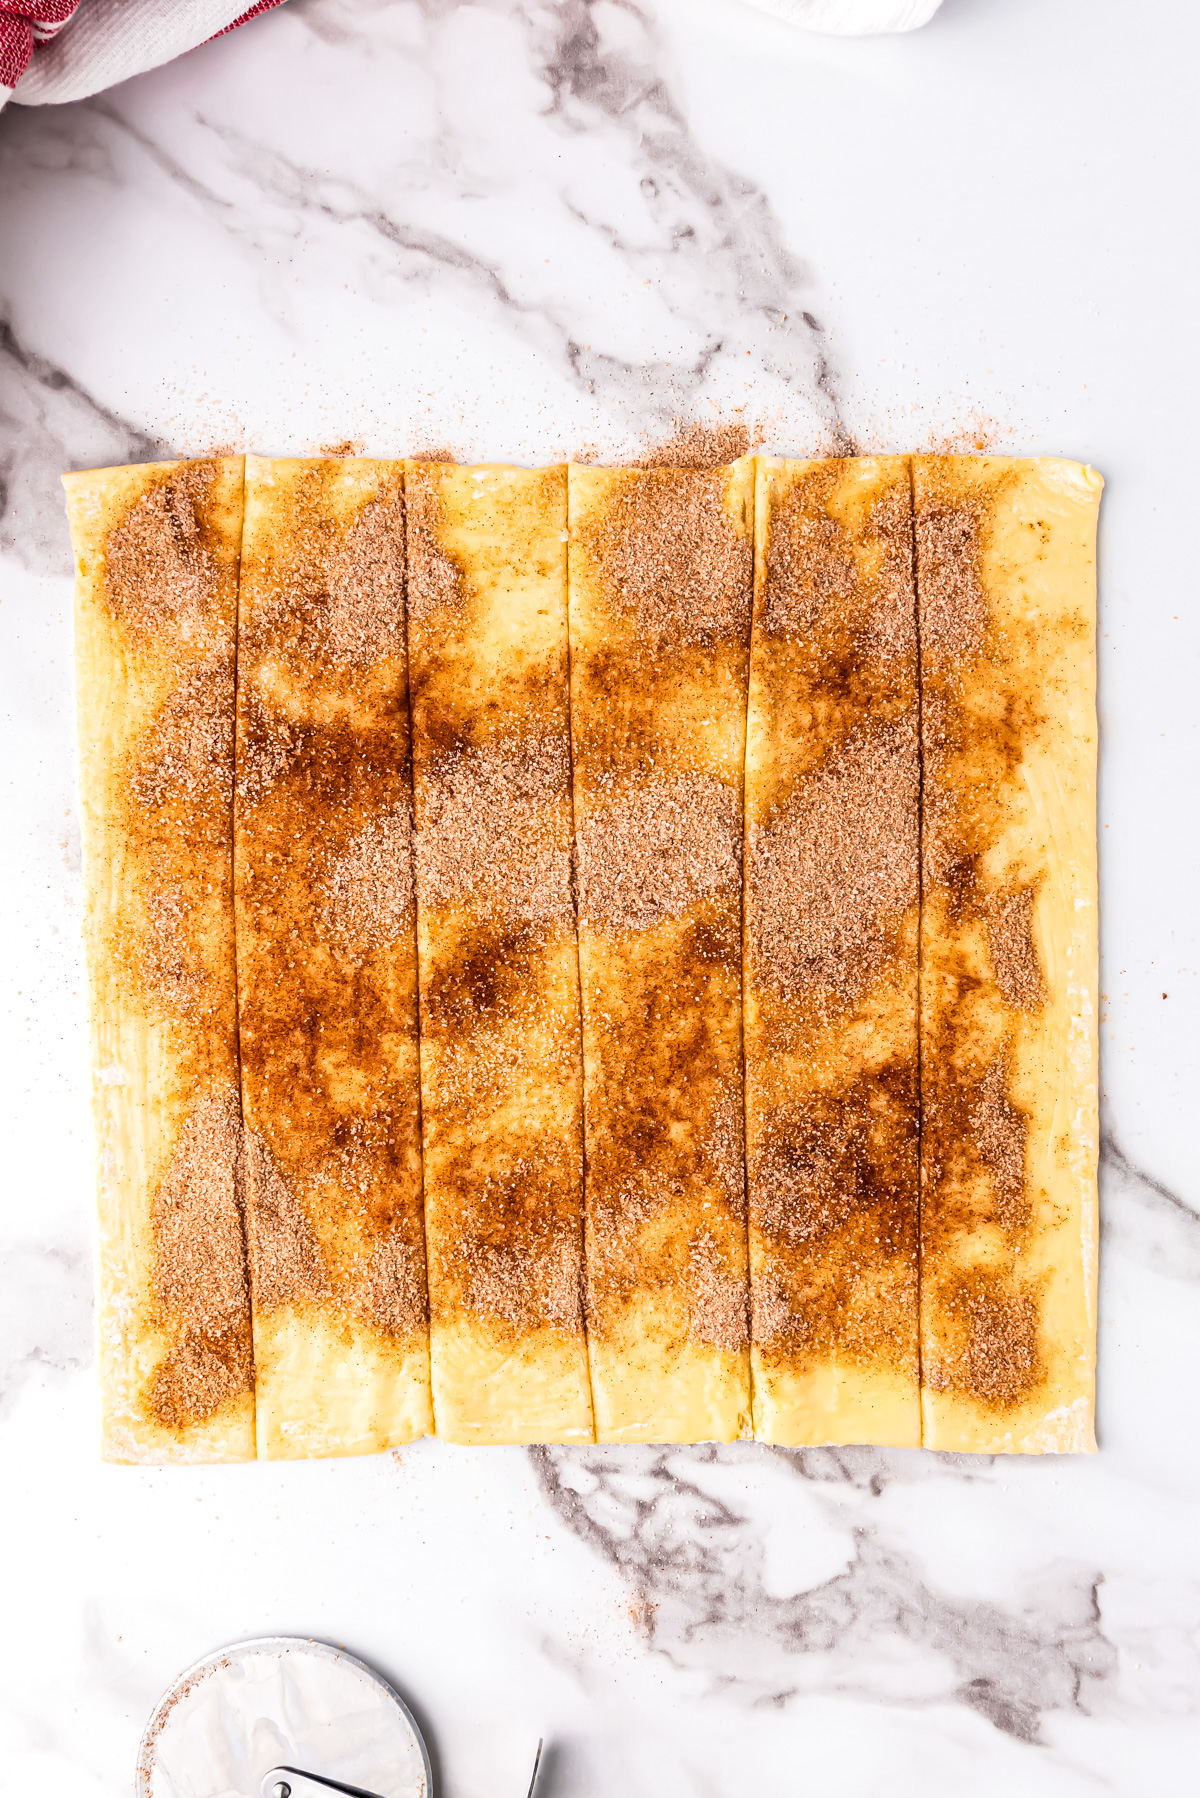 A sheet of puff pastry covered with cinnamon sugar and cut into 6 long strips.